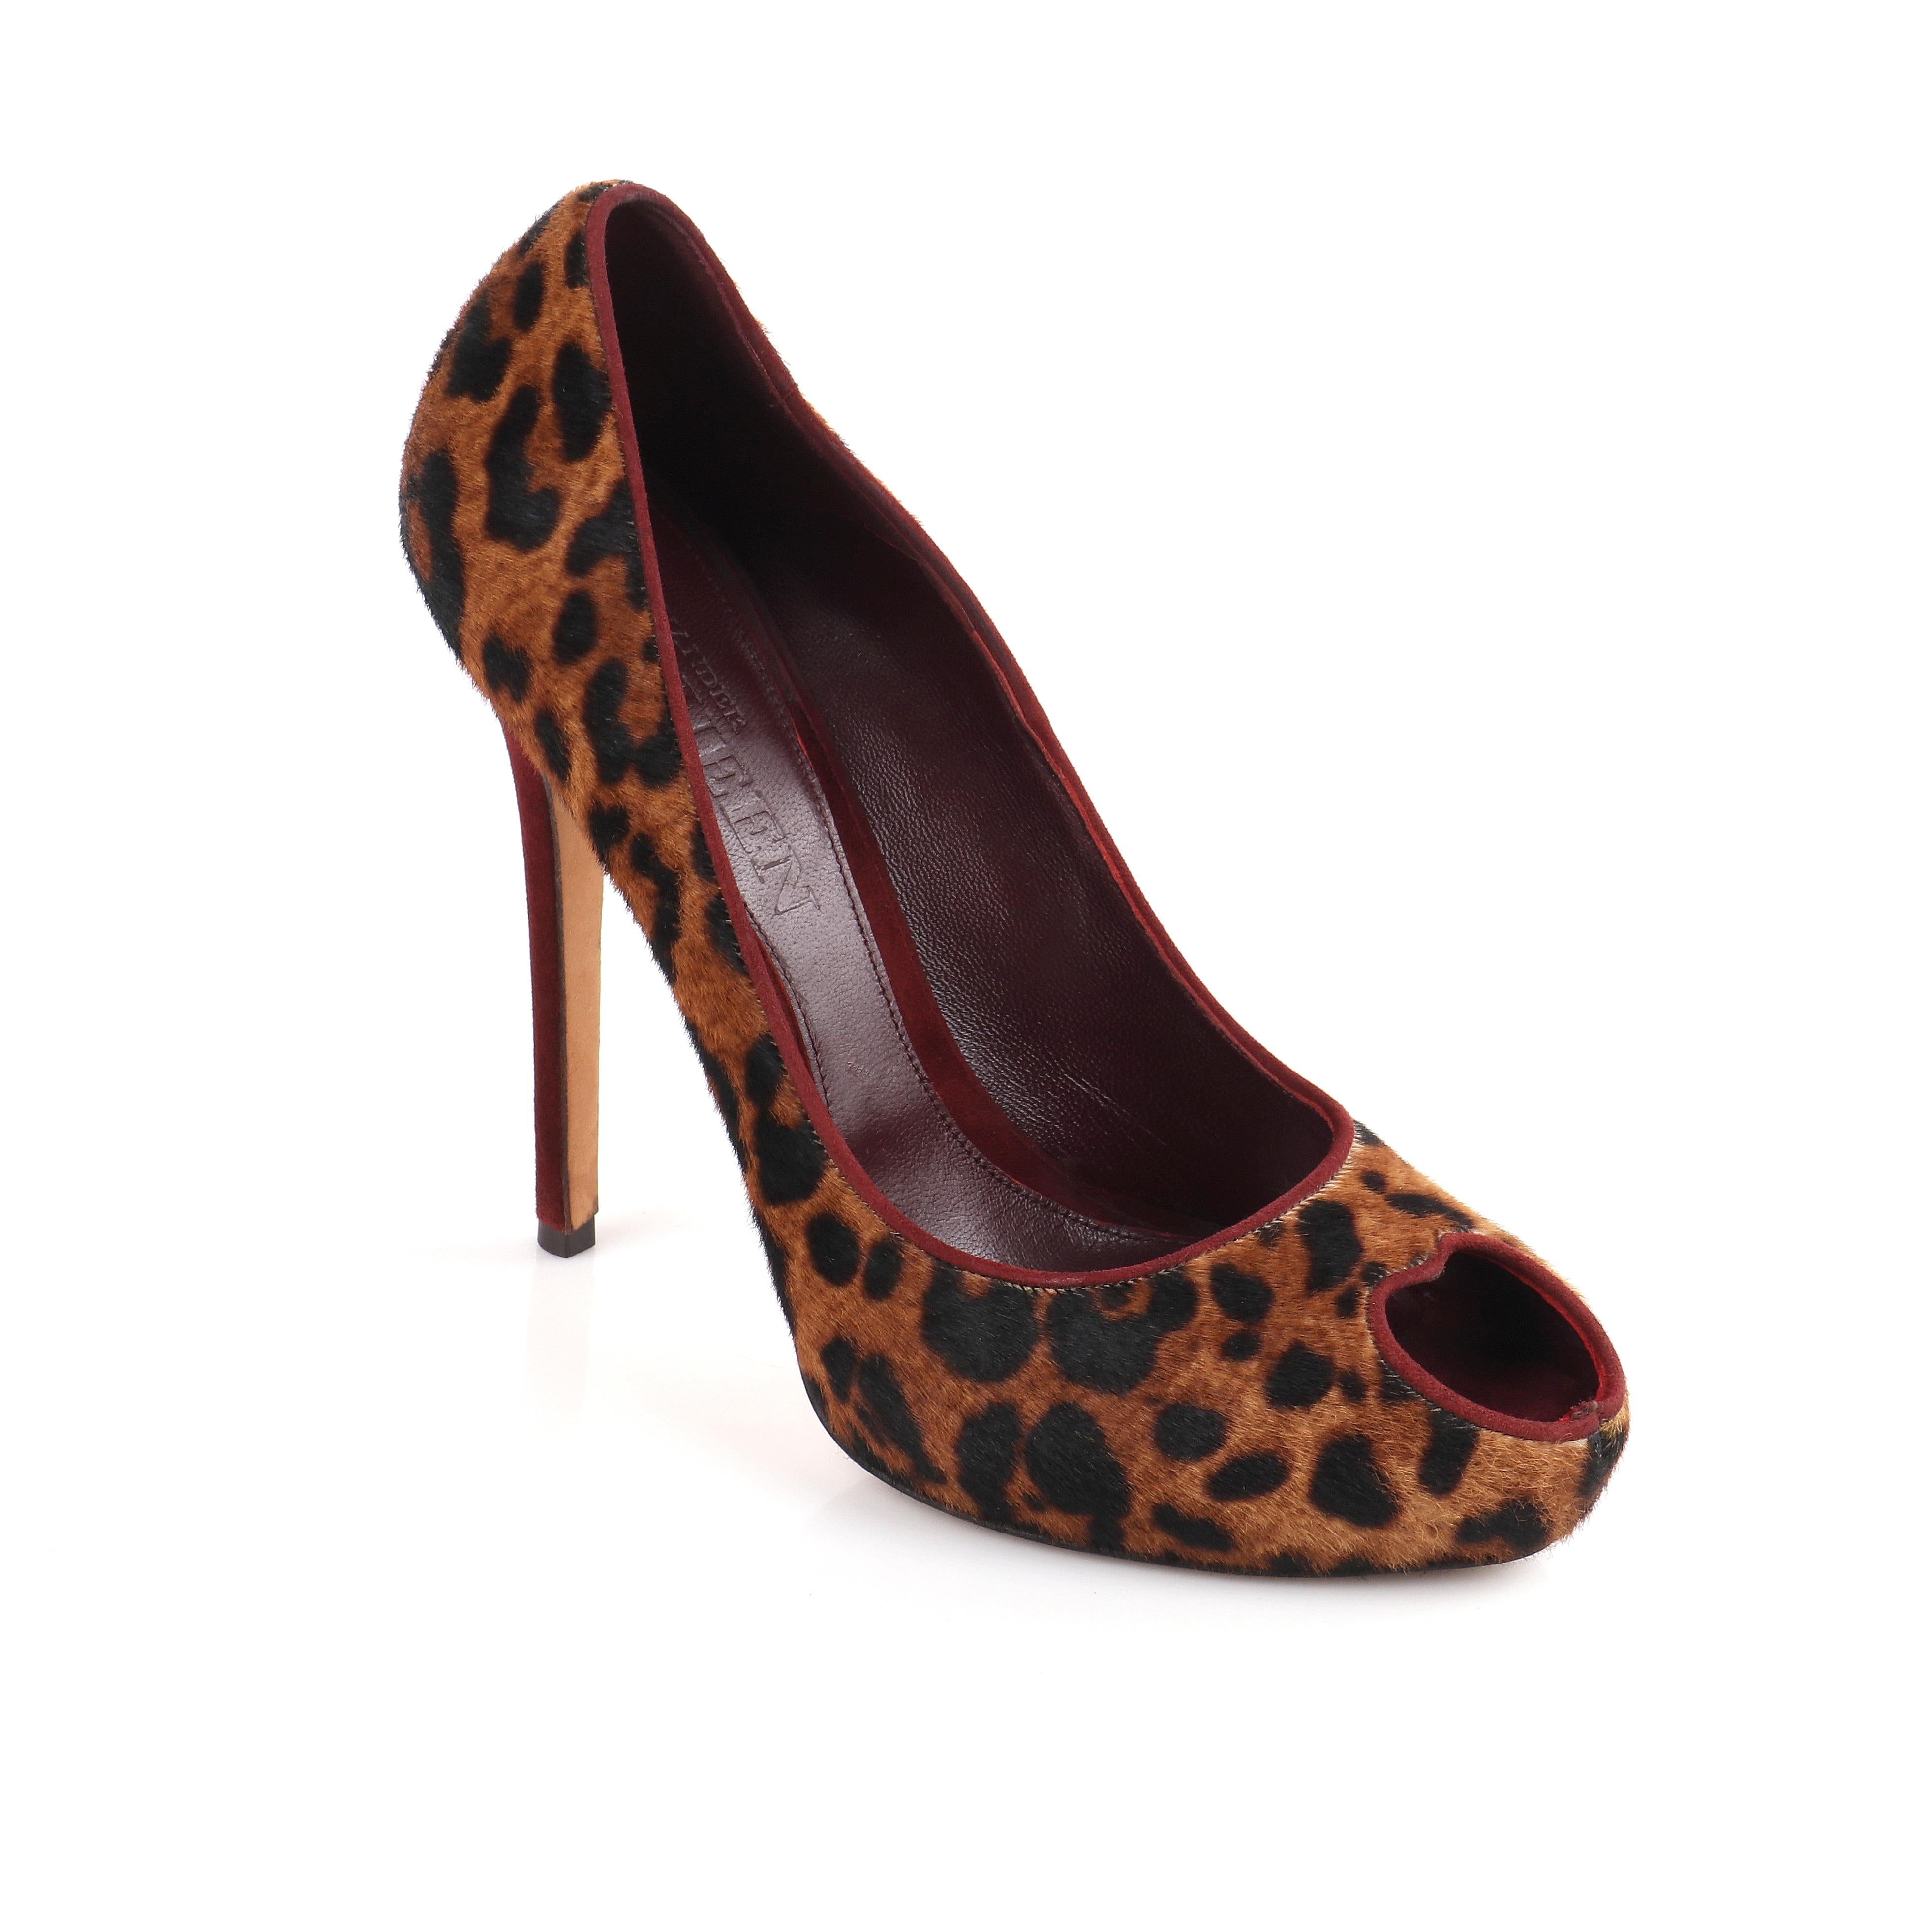 ALEXANDER McQUEEN A/W 2011 Leopard Pony Hair Heart Peep Toe Platform Pumps Shoes
 
Brand / Manufacturer: Alexander McQueen
Collection: A/W 2011
Style: Platform High Heels
Color(s): Shades of tan, brown. black, and burgundy
Lined: No
Unmarked Fabric